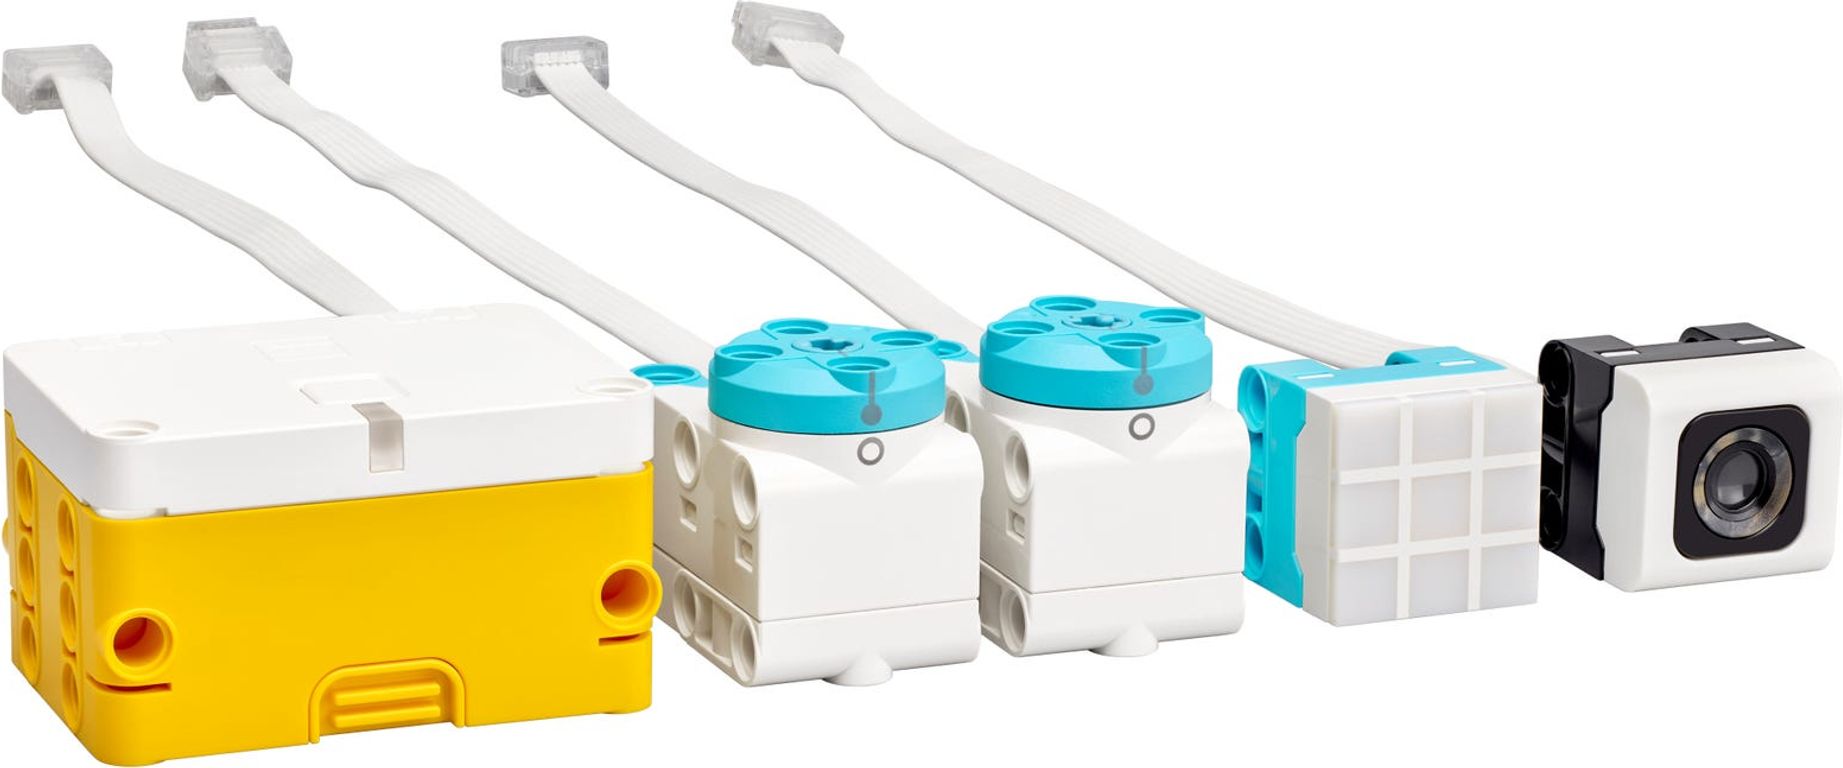 LEGO® Education SPIKE™ Essential Set components